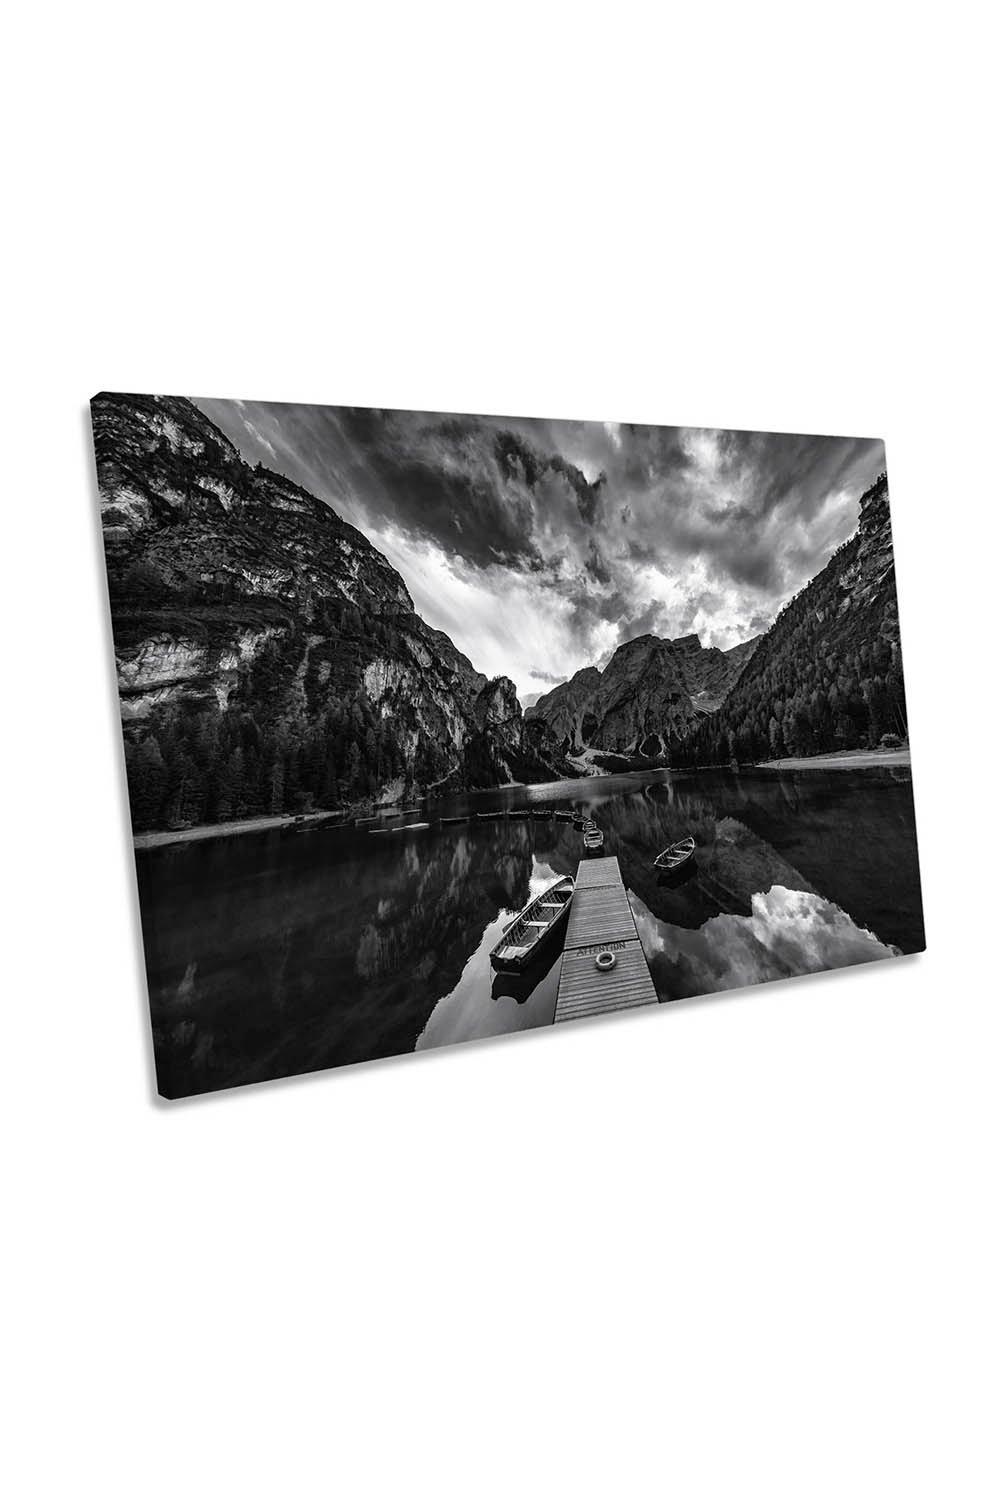 Braies' Shades of Grey Boat Mountains Lake Canvas Wall Art Picture Print